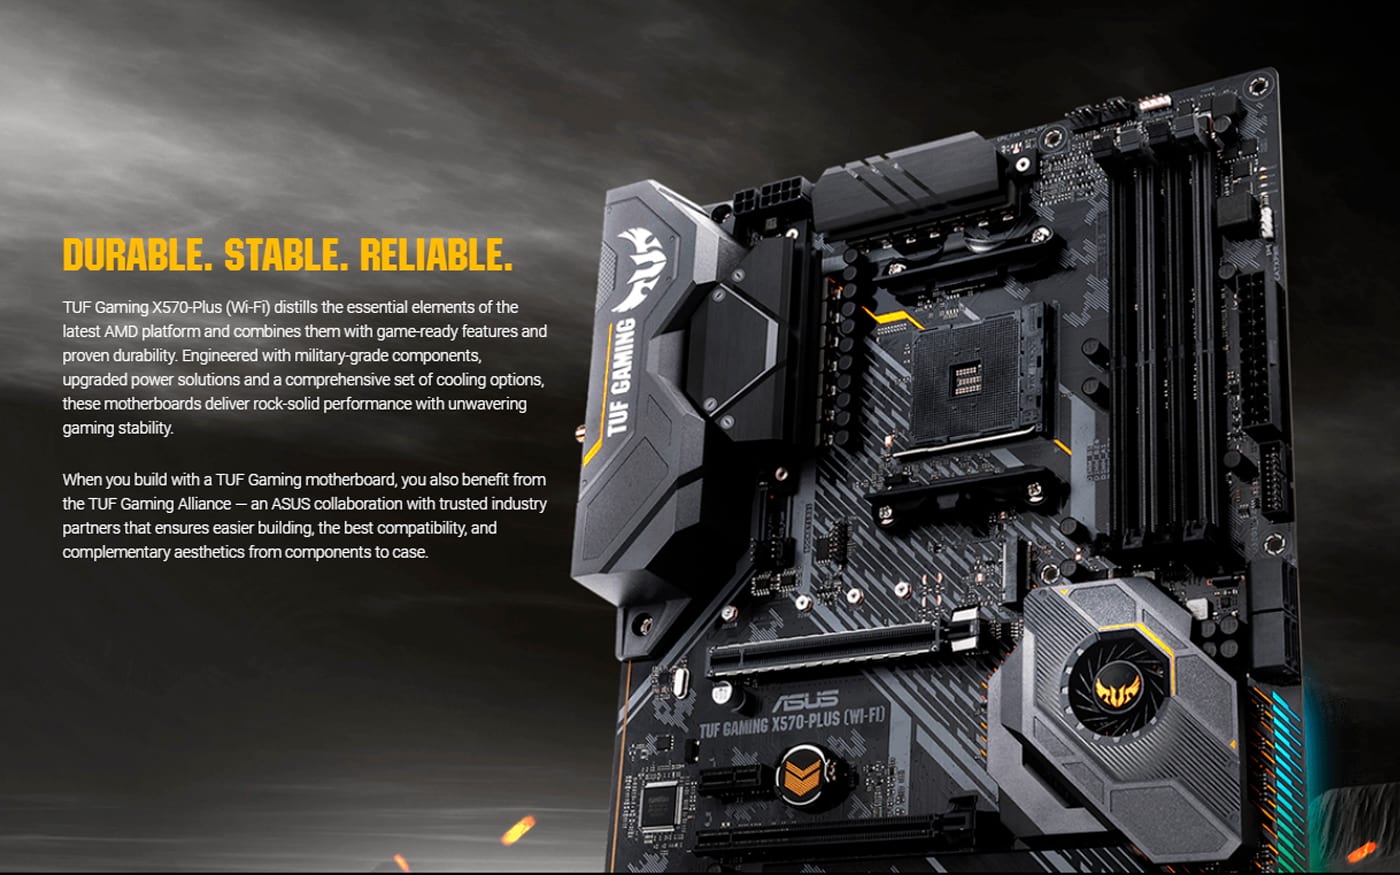 ASUS has the first AMD X570 motherboard produced in Brazil